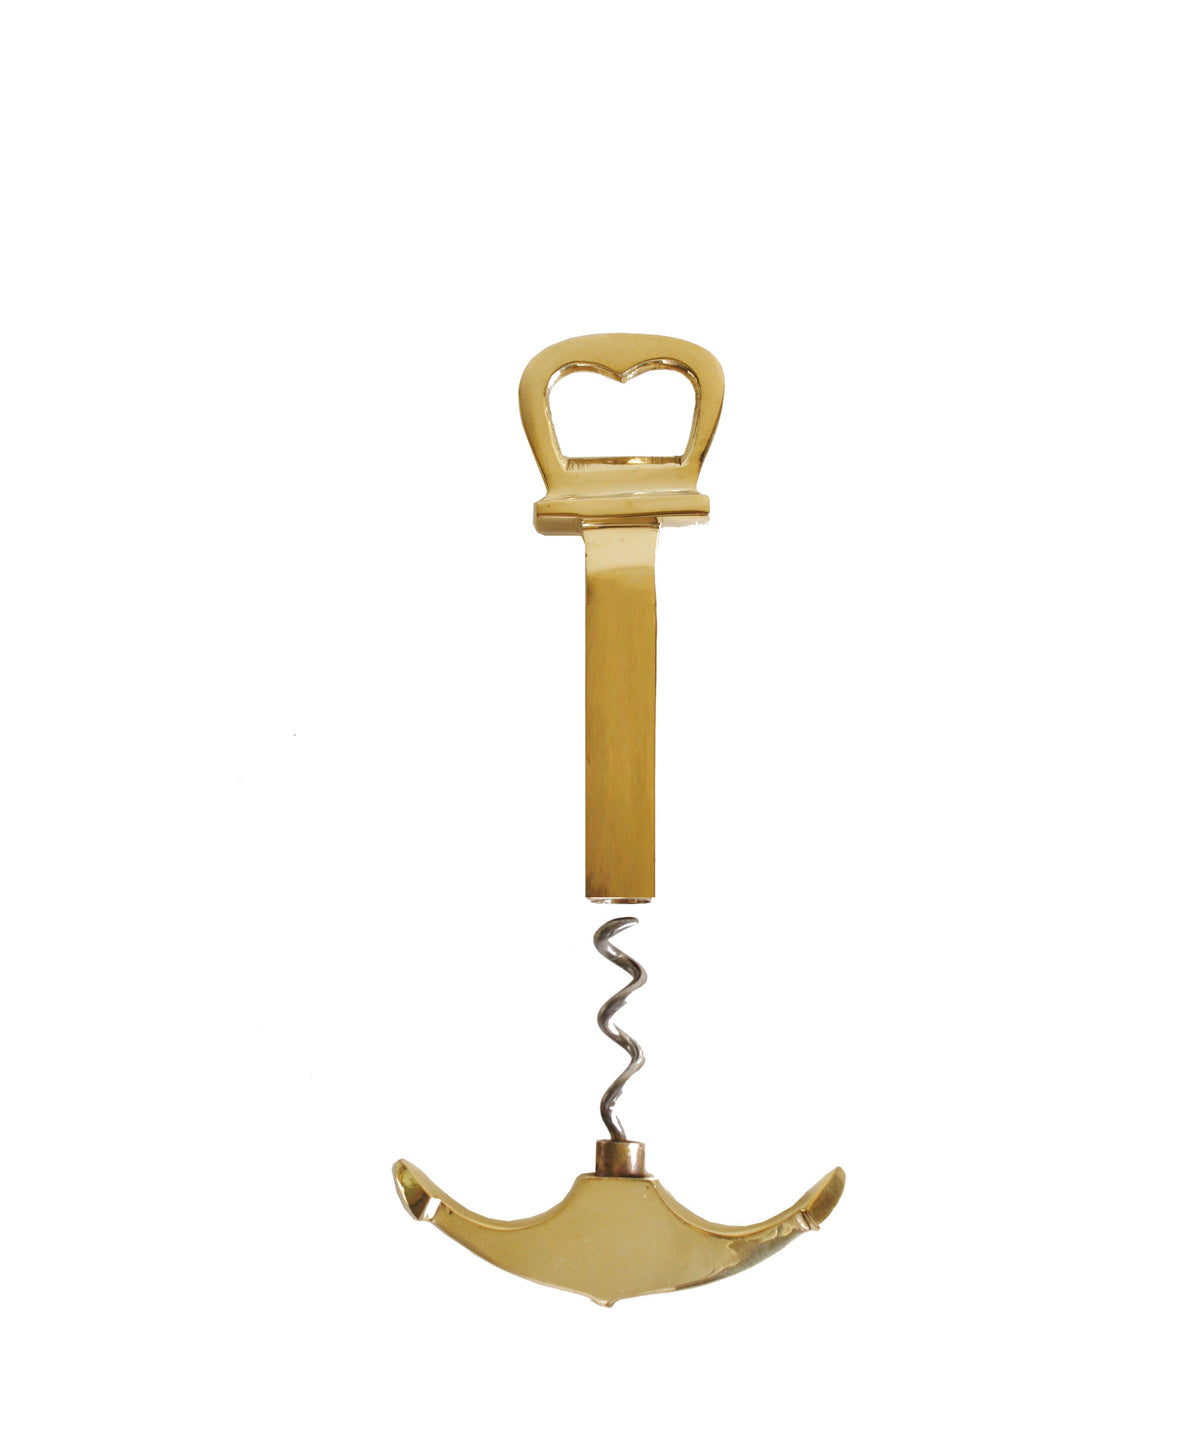 old hand made solid brass corkscrew on a natural wood background